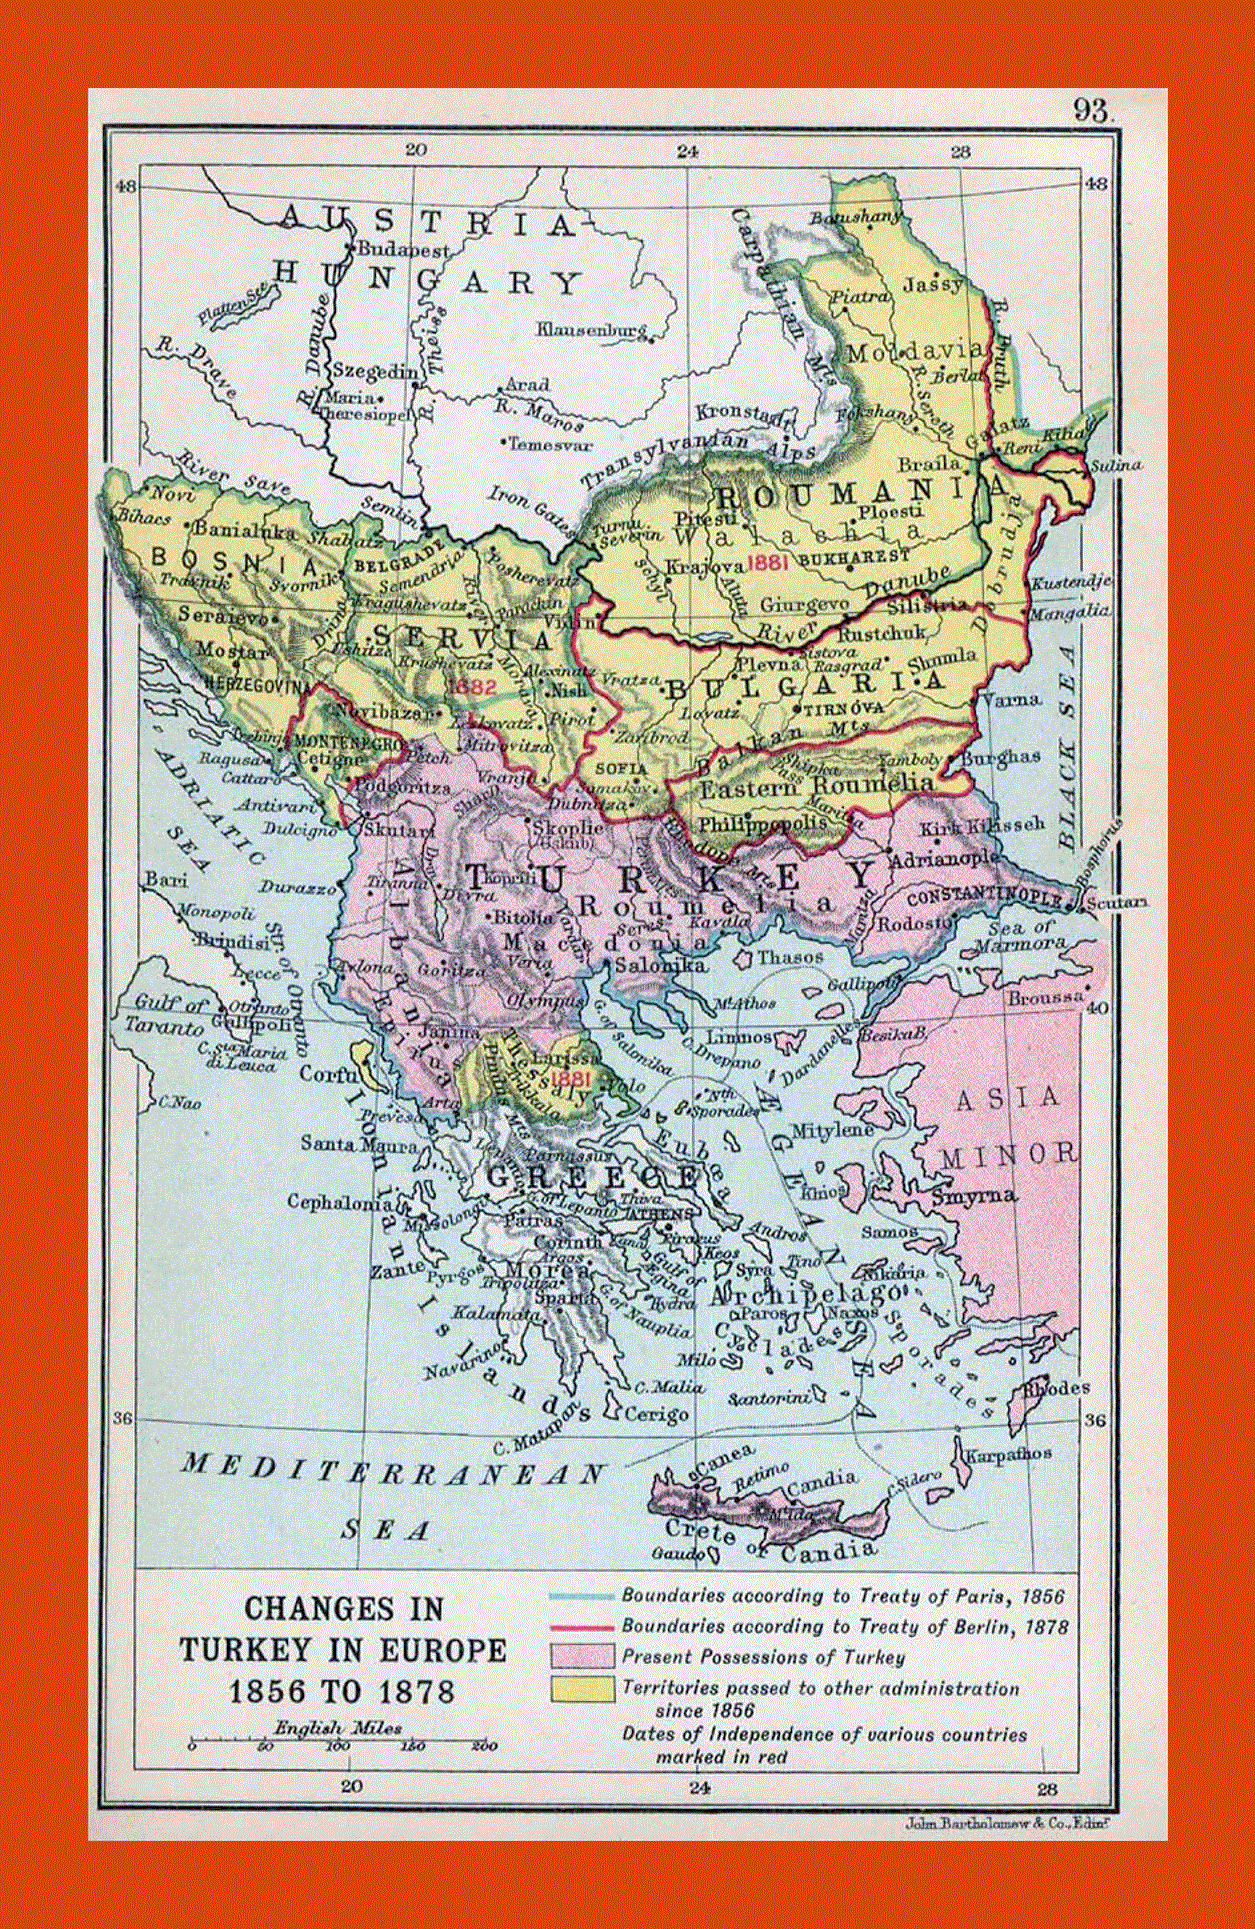 Old map of Balkans - 1912